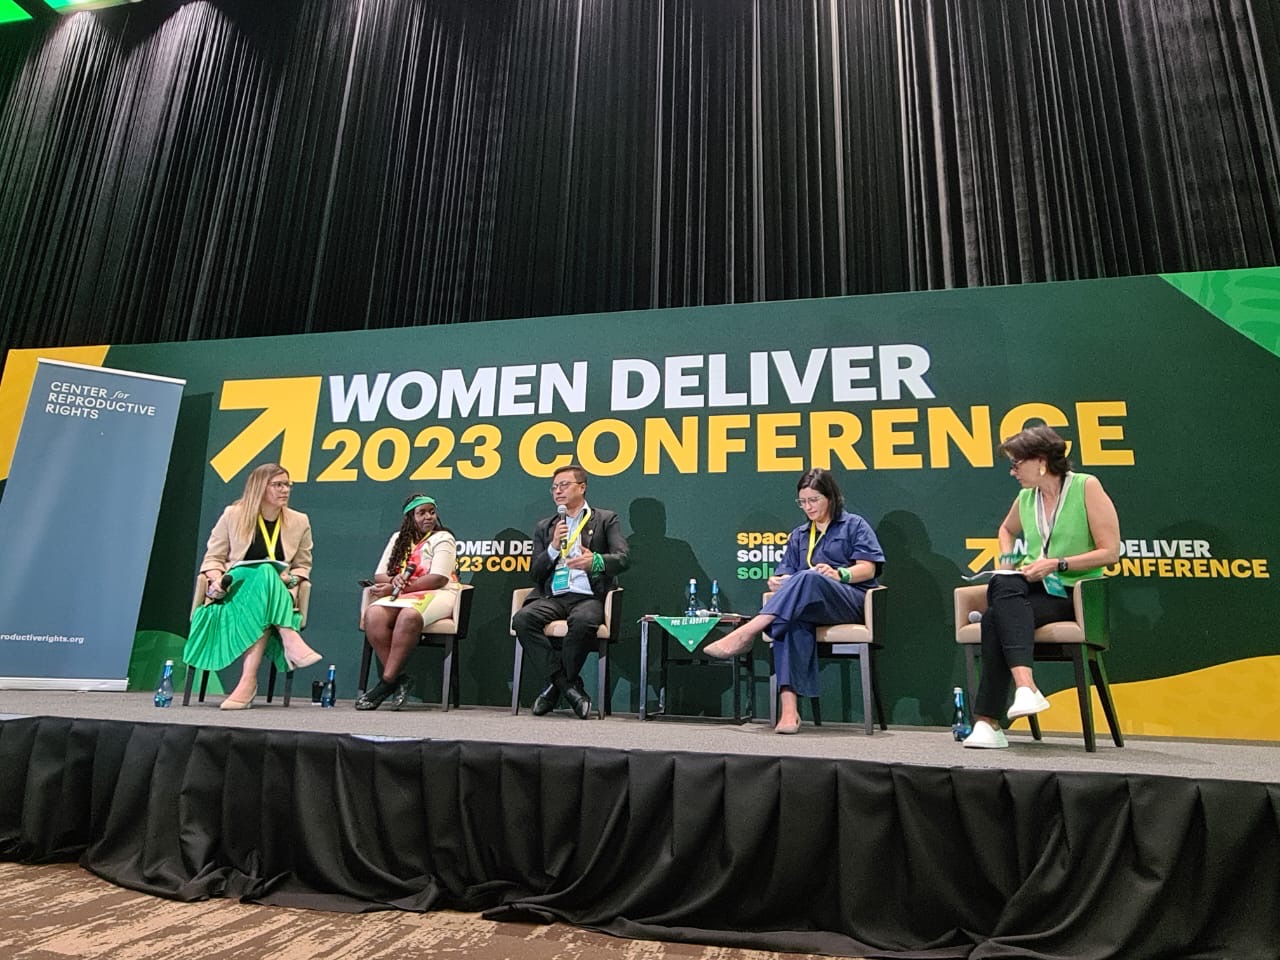 Participating as a speaker in Women Deliver 2023 Conference in Kigali, Rwanda